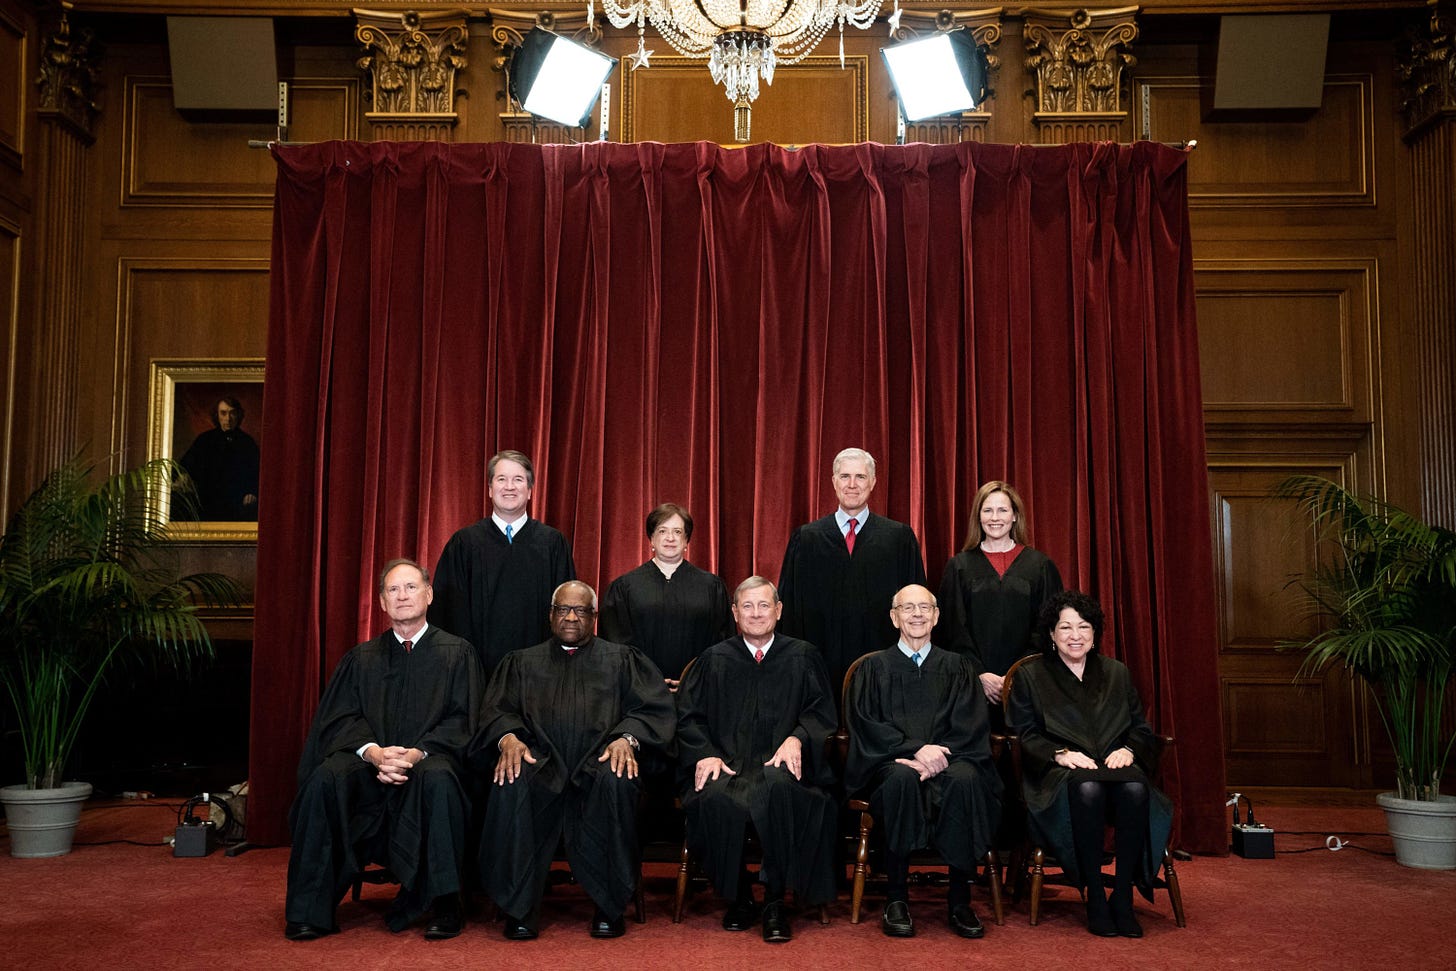 The Supreme Court of mistrust | On Point